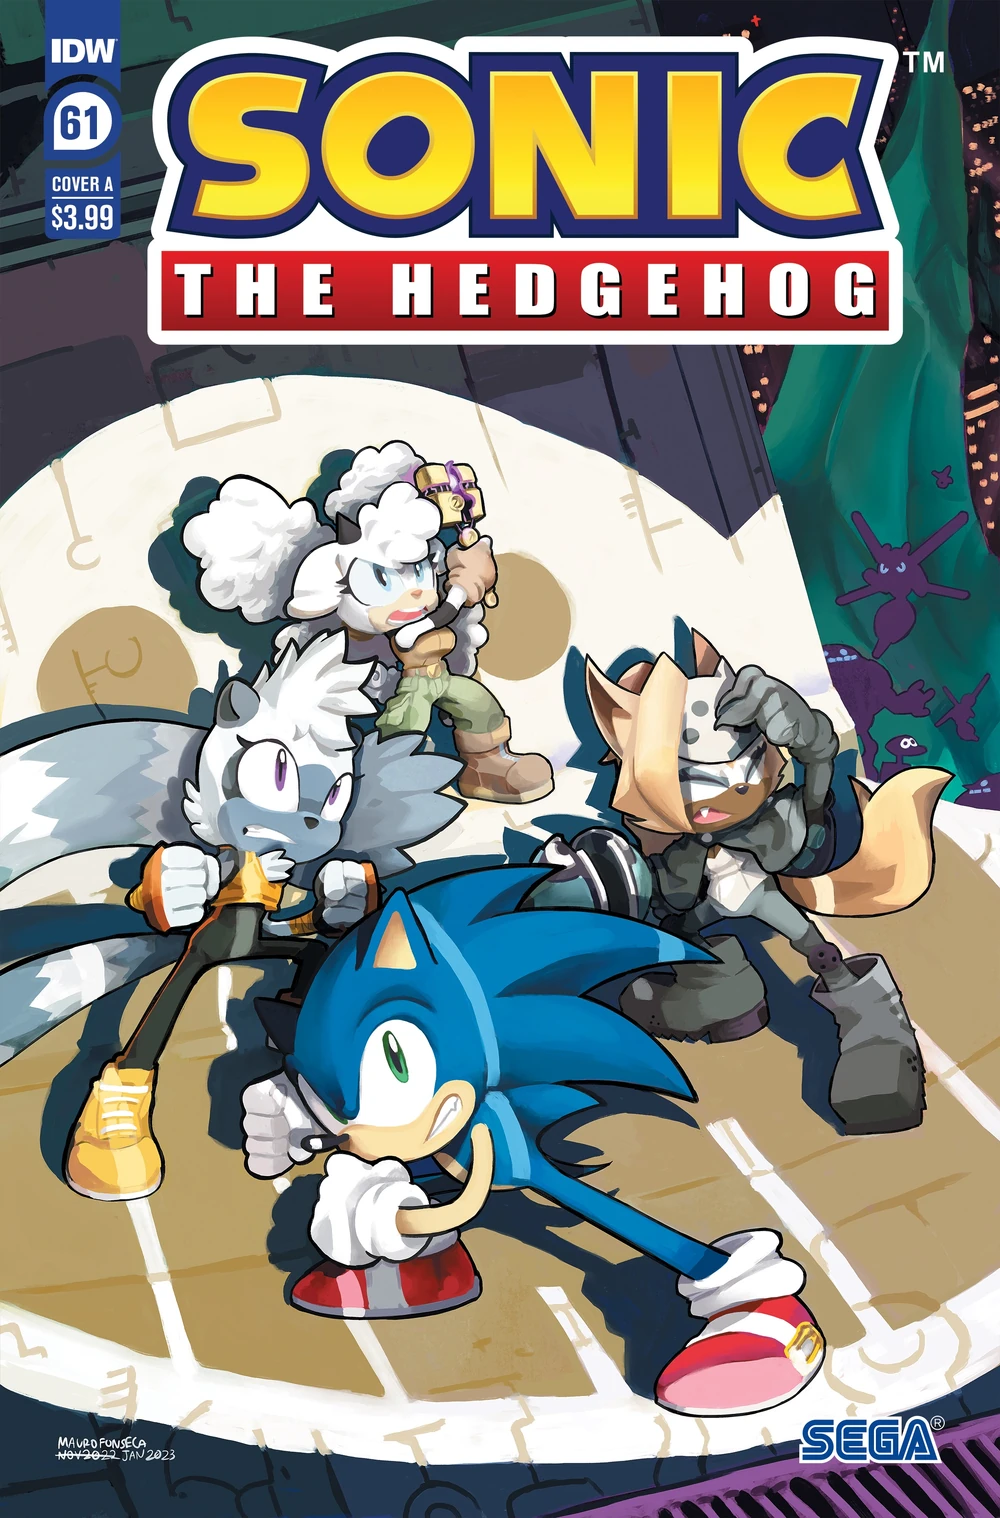 Sonic The Hedgehog #61 Cover A